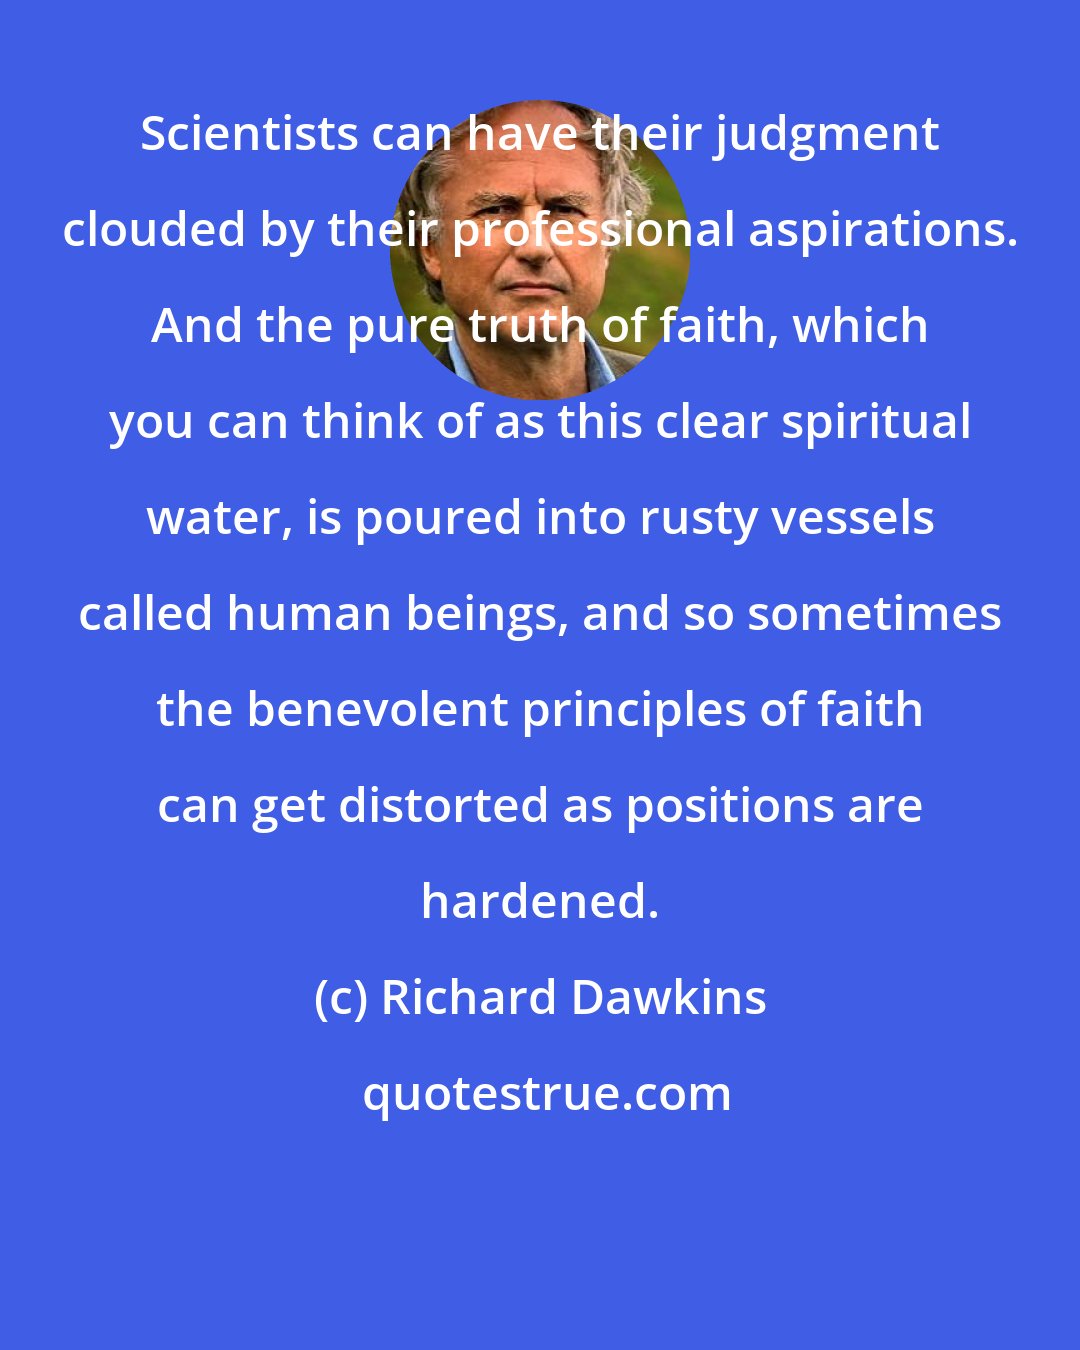 Richard Dawkins: Scientists can have their judgment clouded by their professional aspirations. And the pure truth of faith, which you can think of as this clear spiritual water, is poured into rusty vessels called human beings, and so sometimes the benevolent principles of faith can get distorted as positions are hardened.